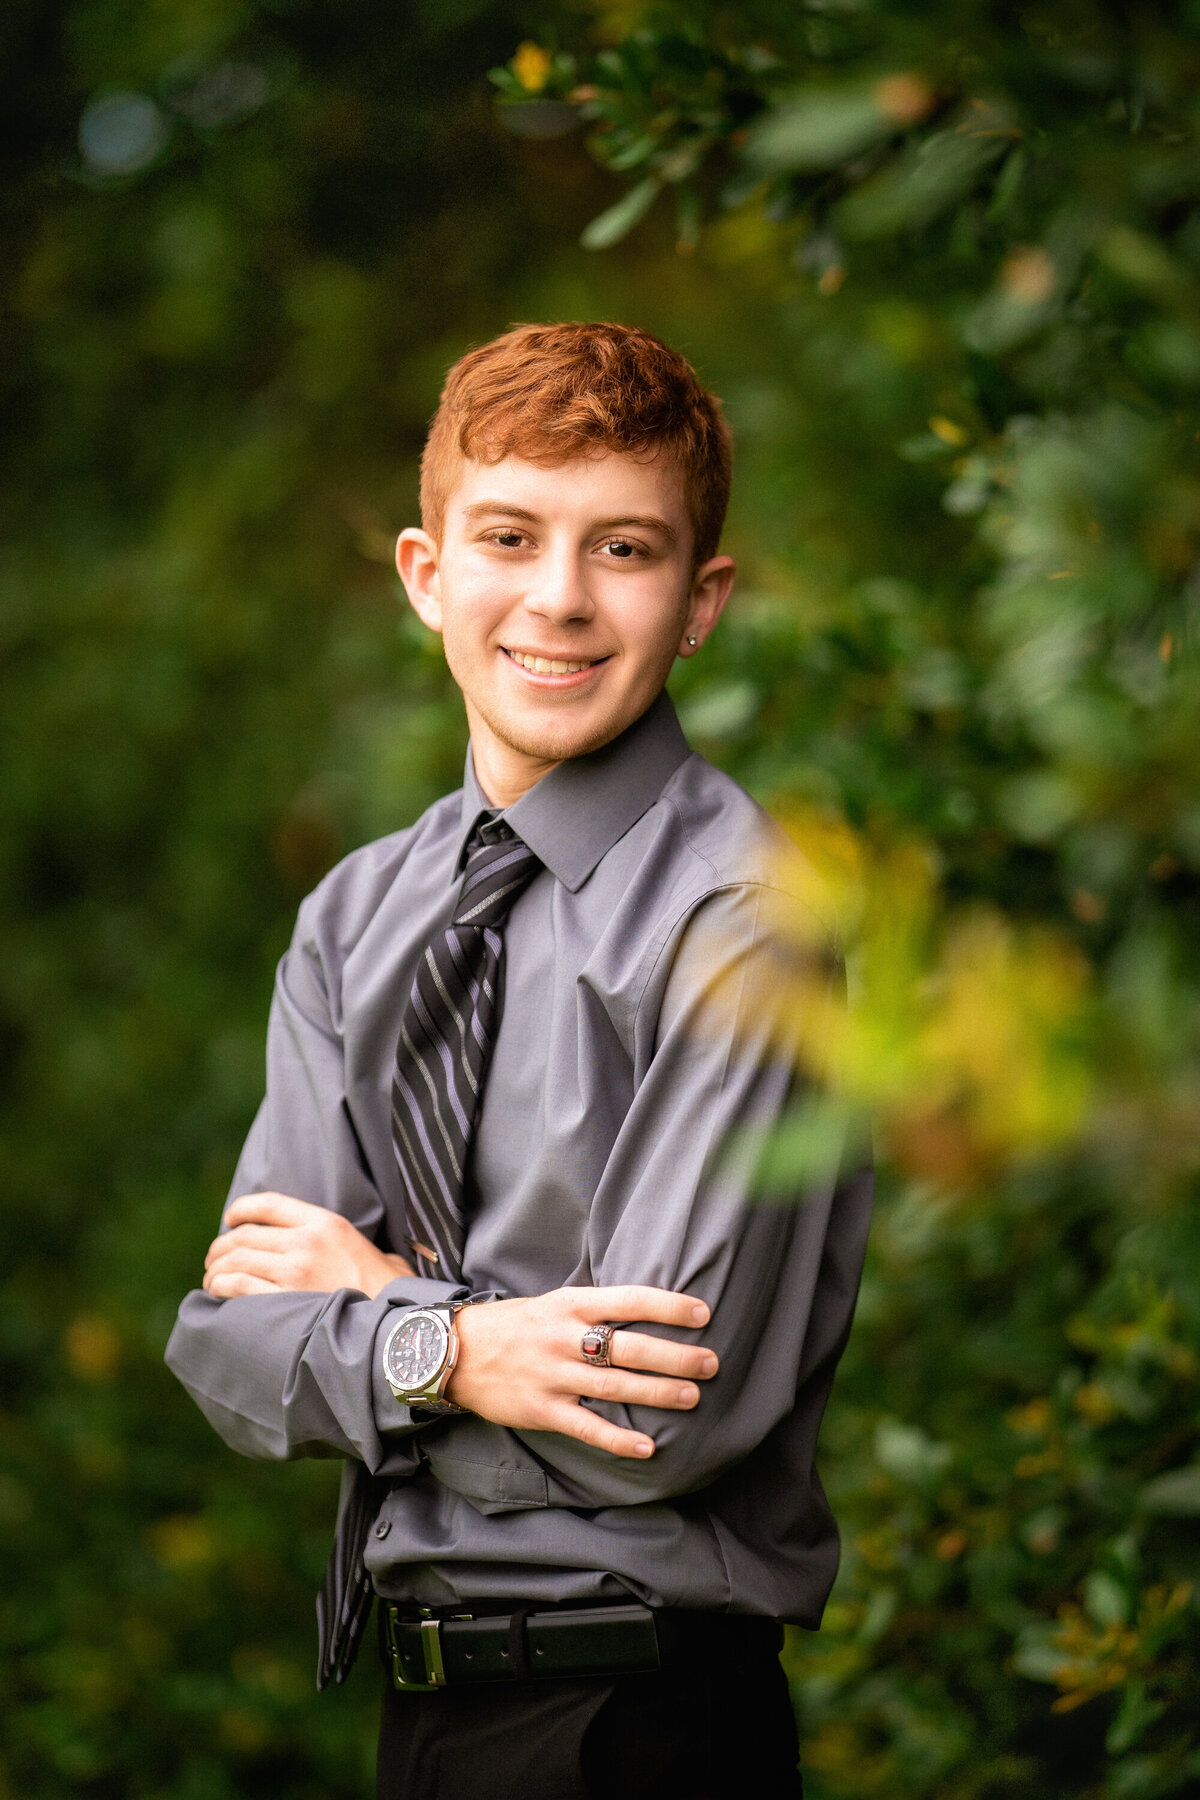 Senior boy with red hair standing in  the trees.  He has his arms crossed over his chest.  He is wearing a gray dress shirt and black striped tie.  He is also wearing a class ring and a watch.  He is turned slightly and facing the camera.